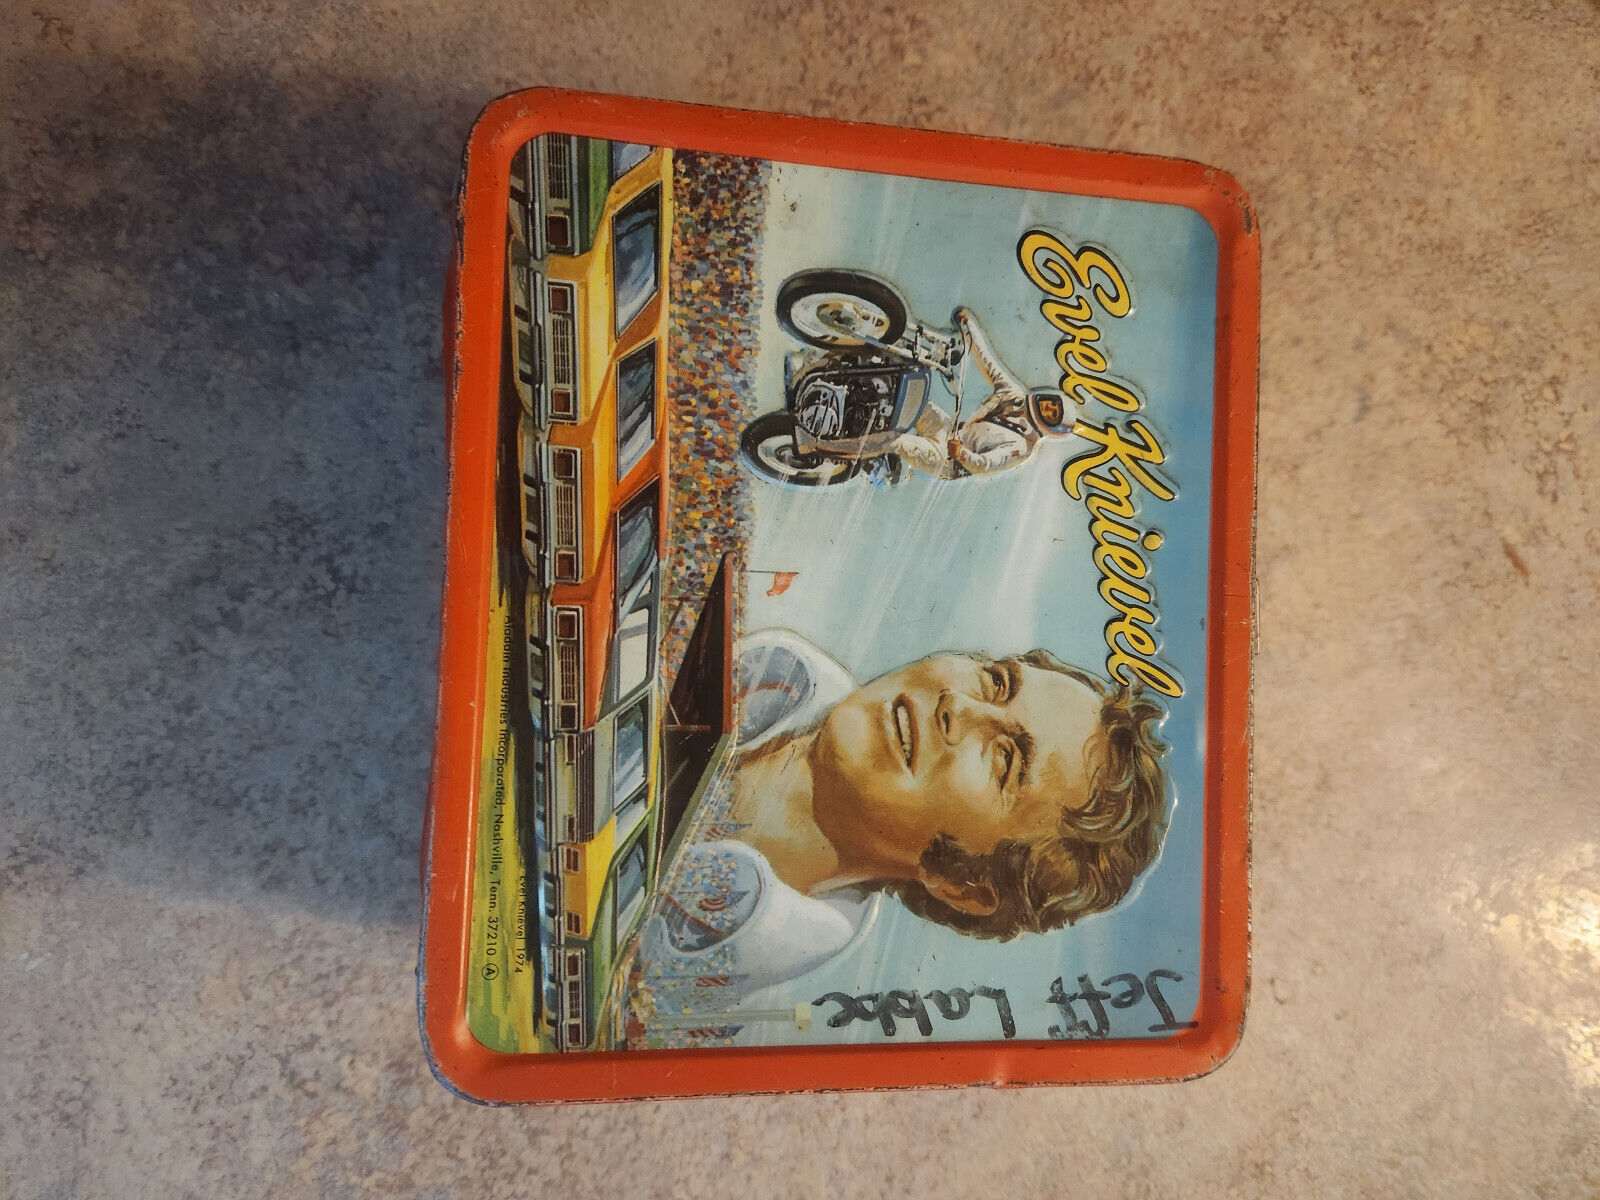 Vintage 1974 Evel Knievel Metal Lunch Box 